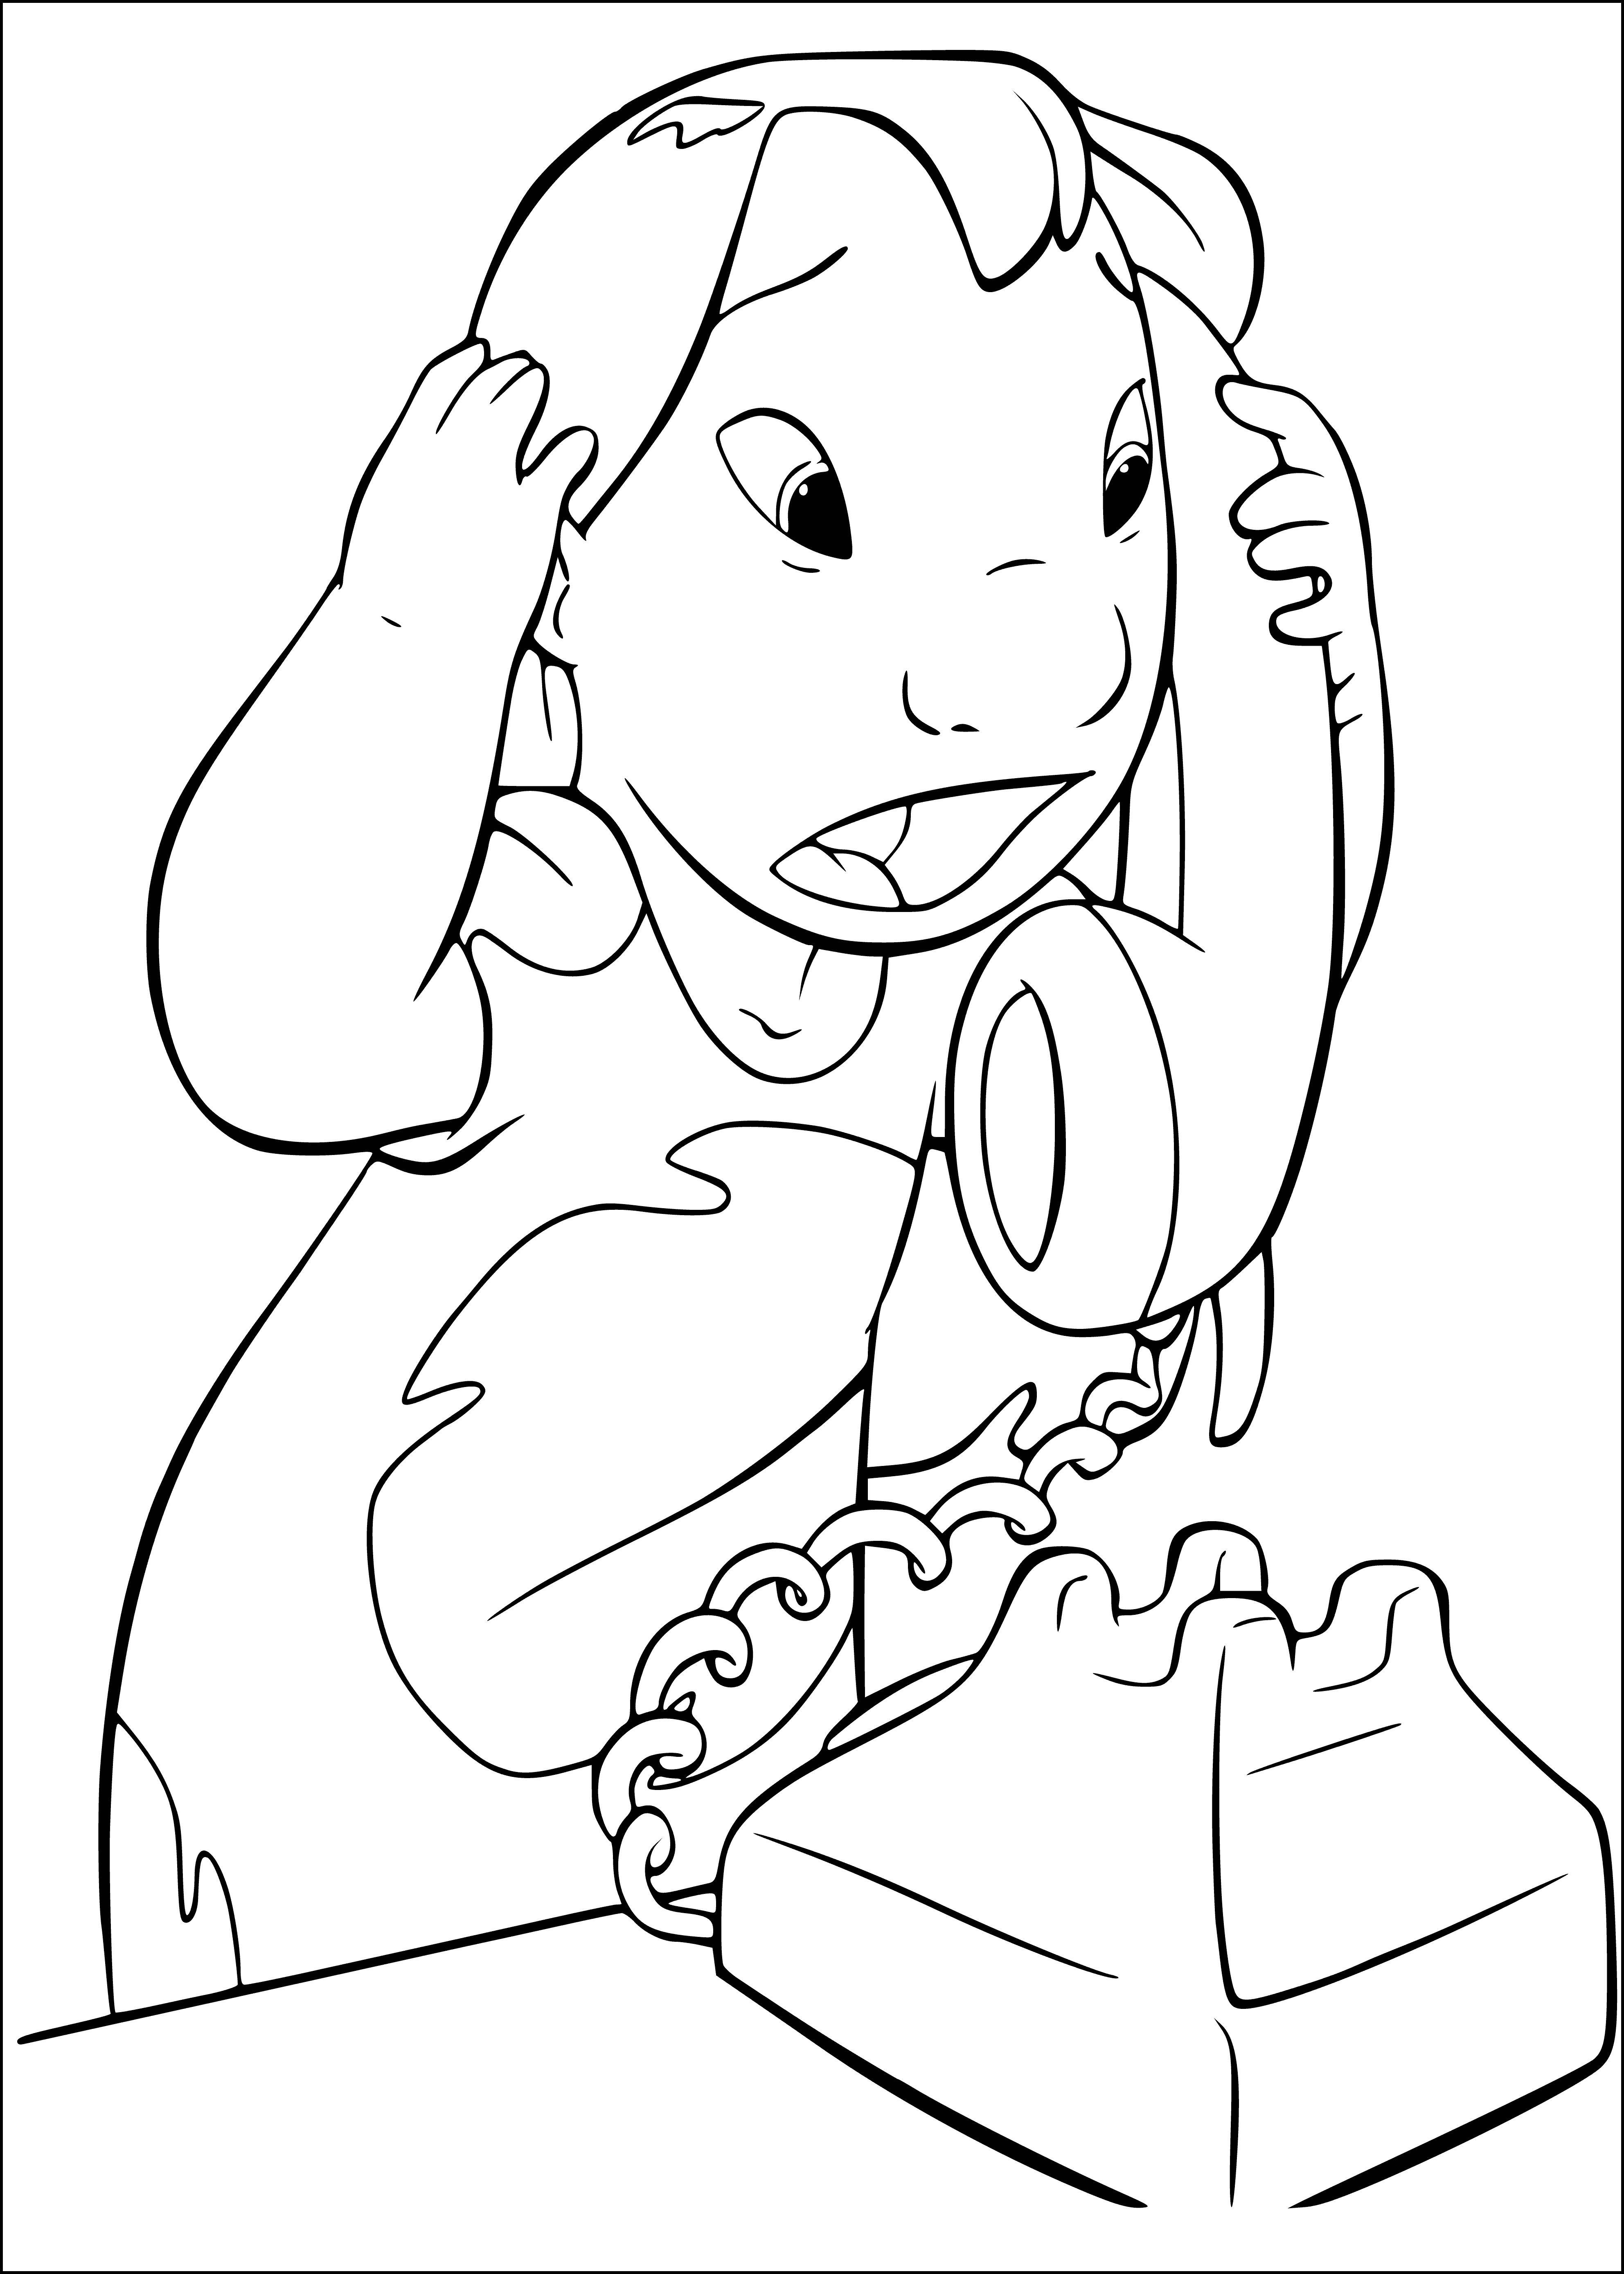 Lilo is ringing Cobra coloring page